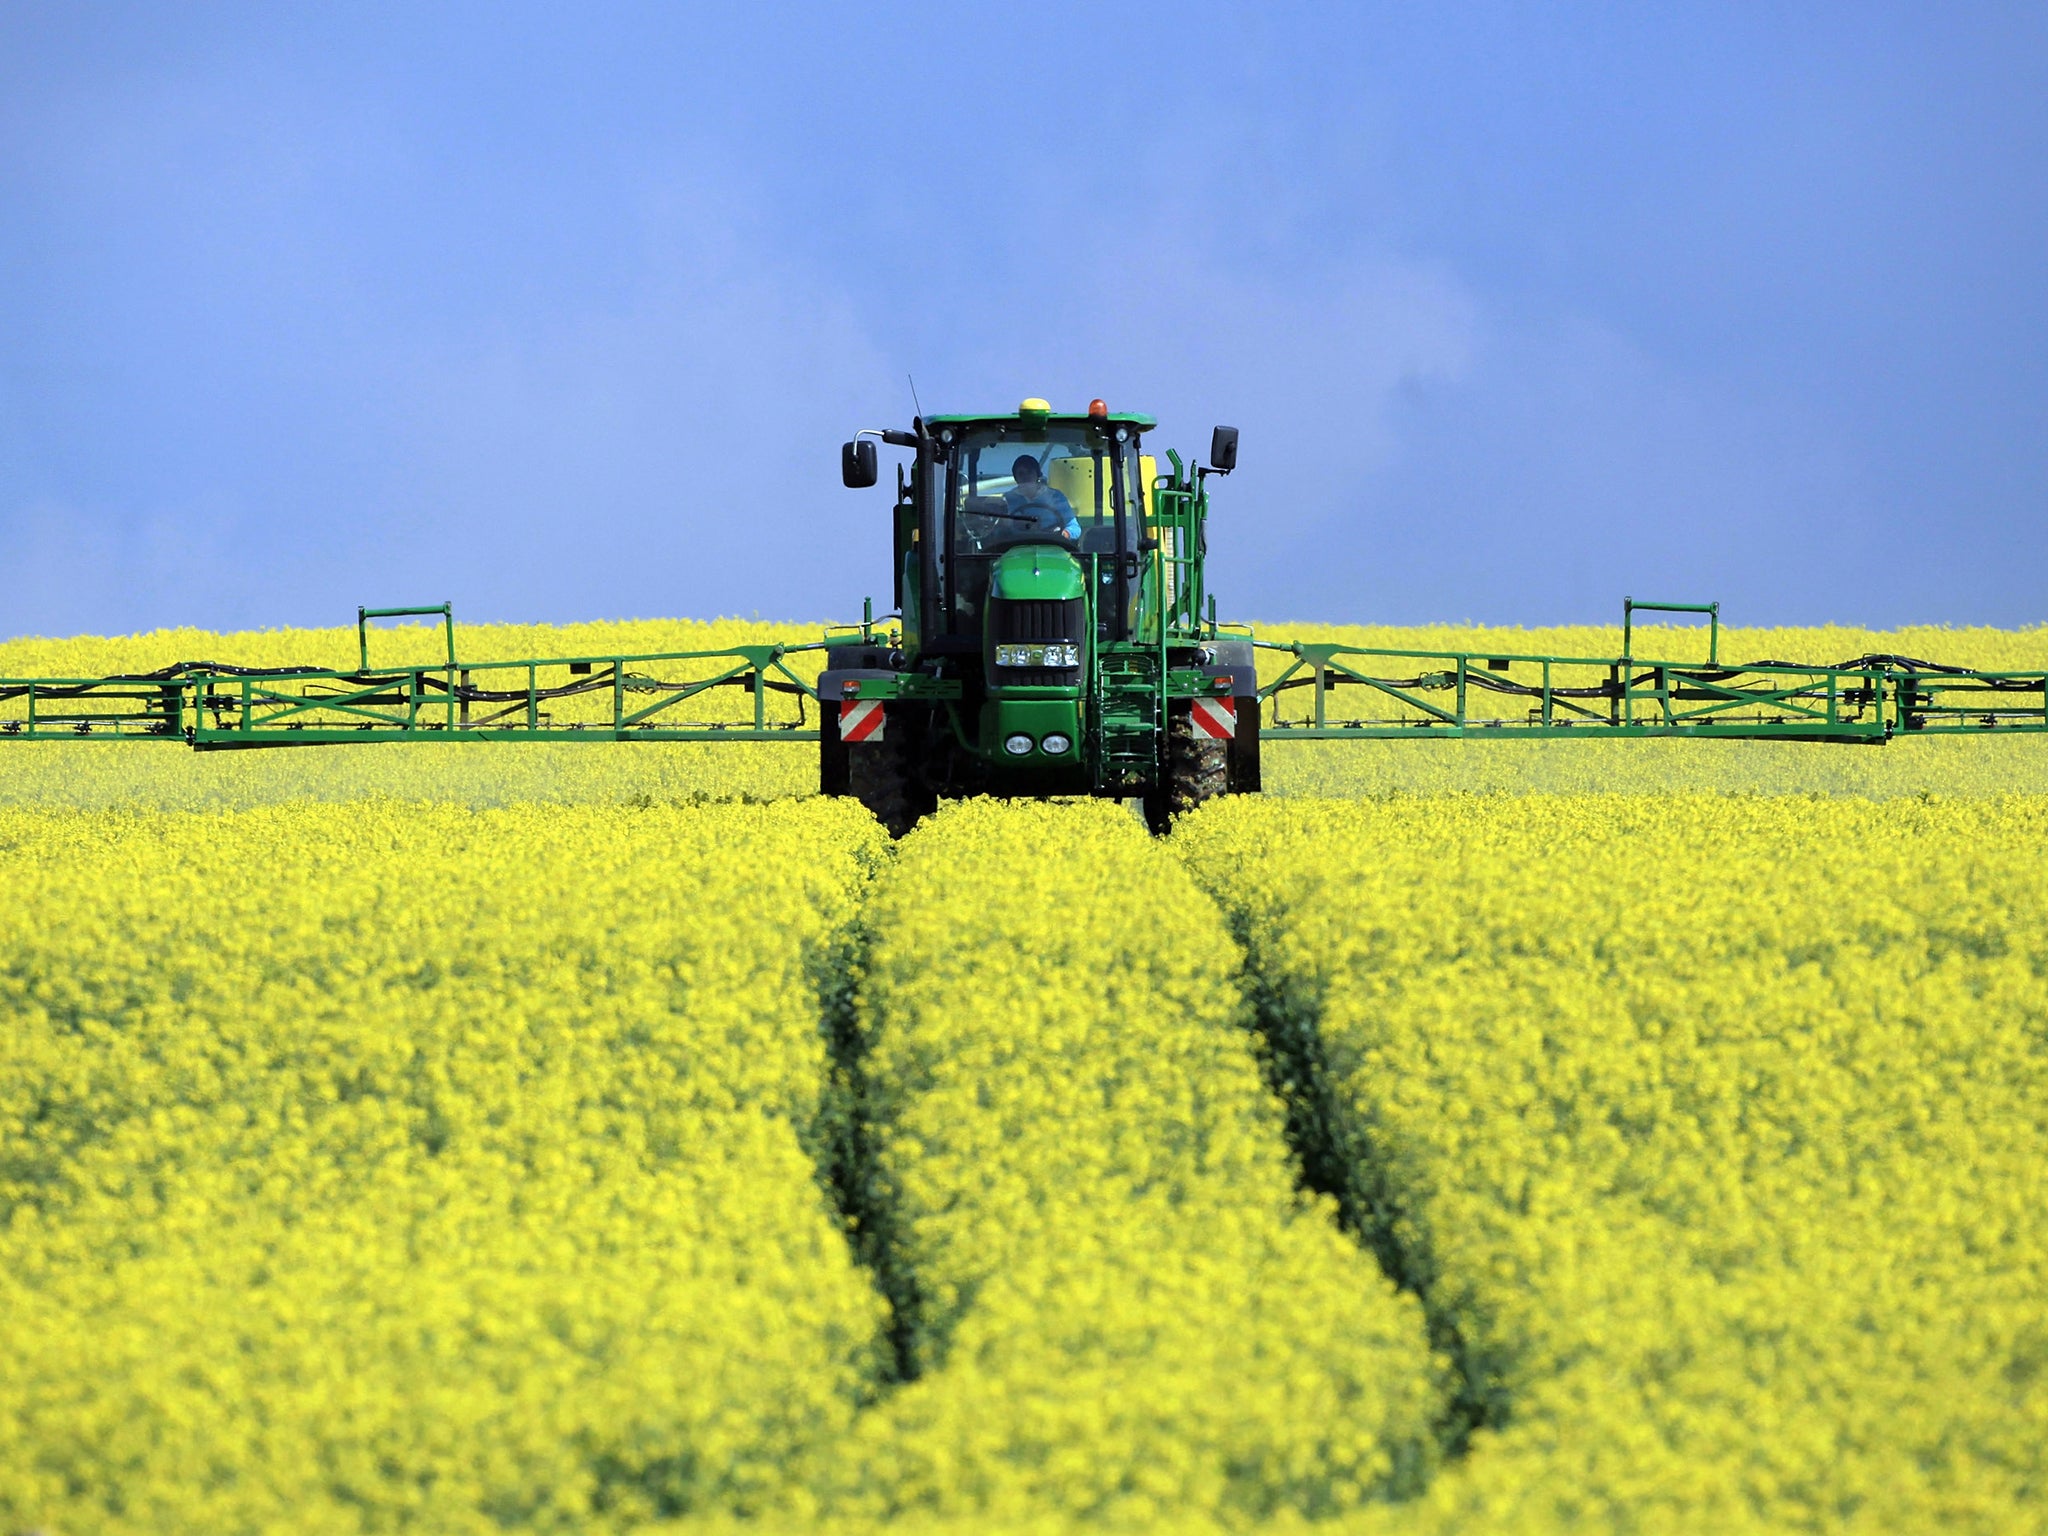 A field is sprayed with pesticide